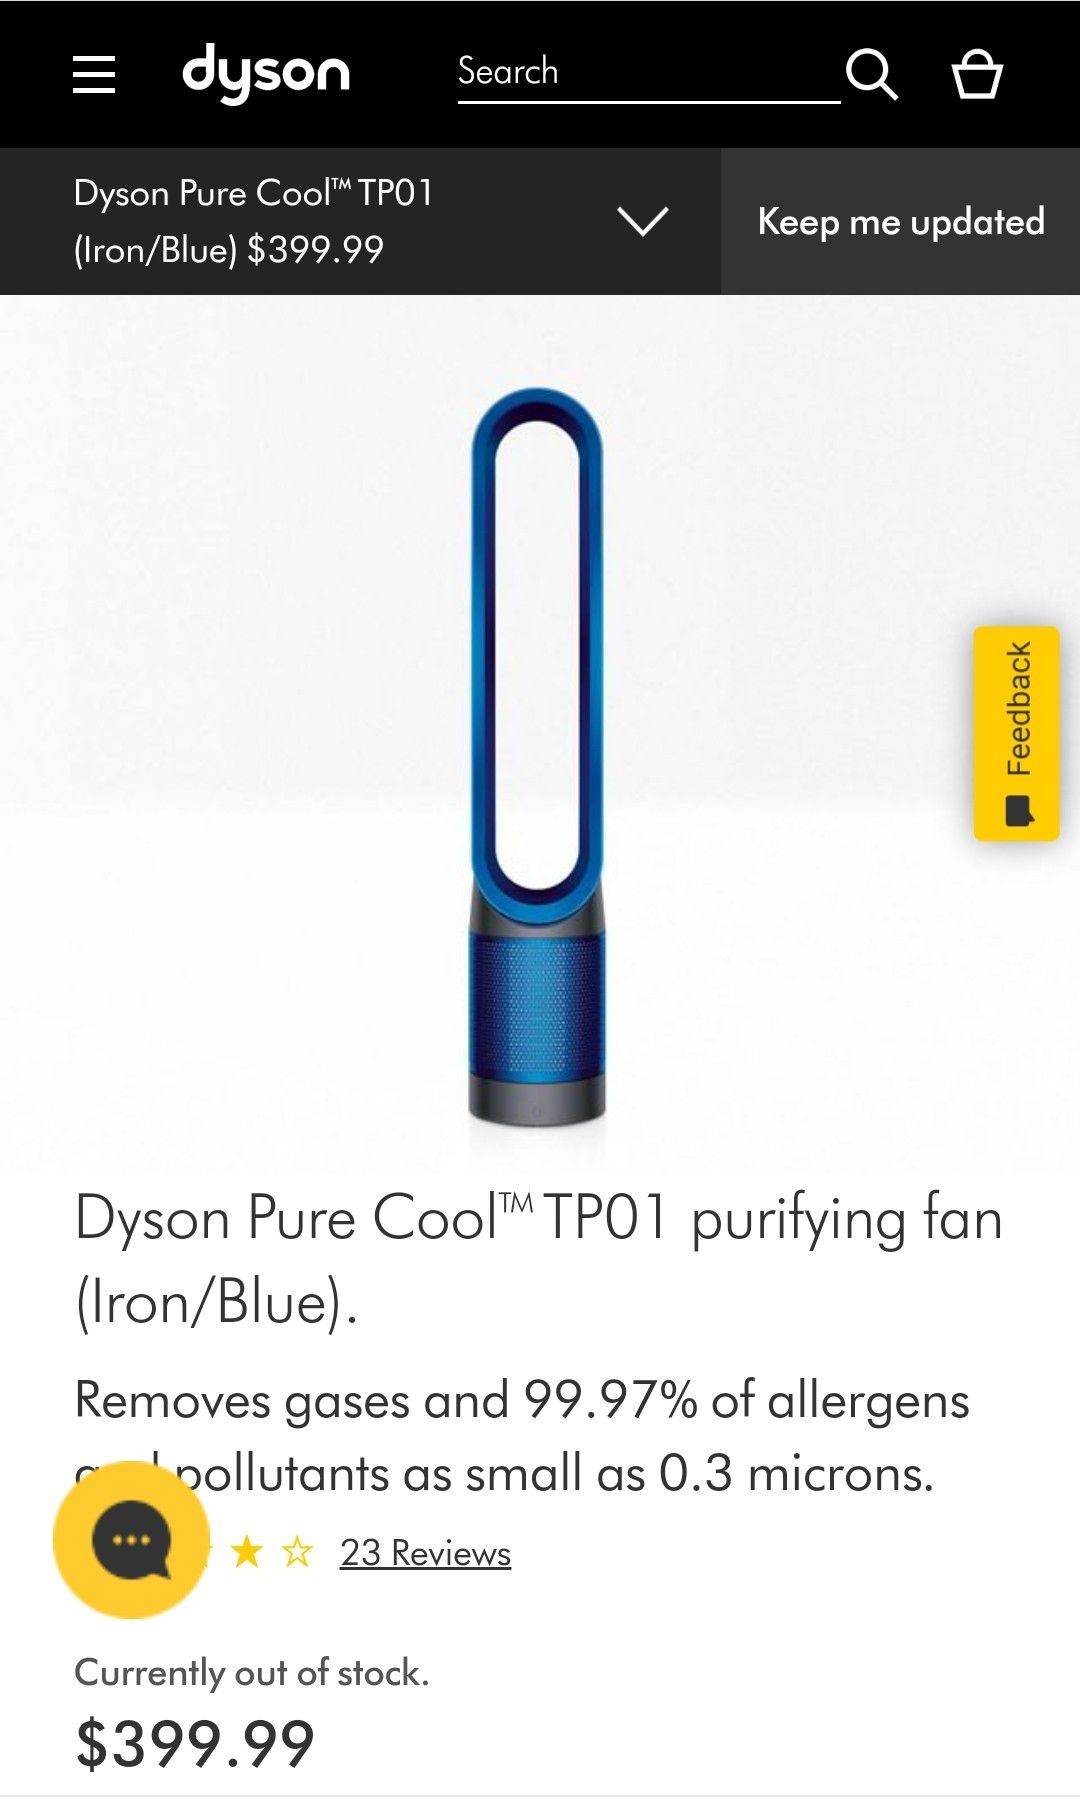 Dyson Pure Cool (TP01) Purifying Fan.